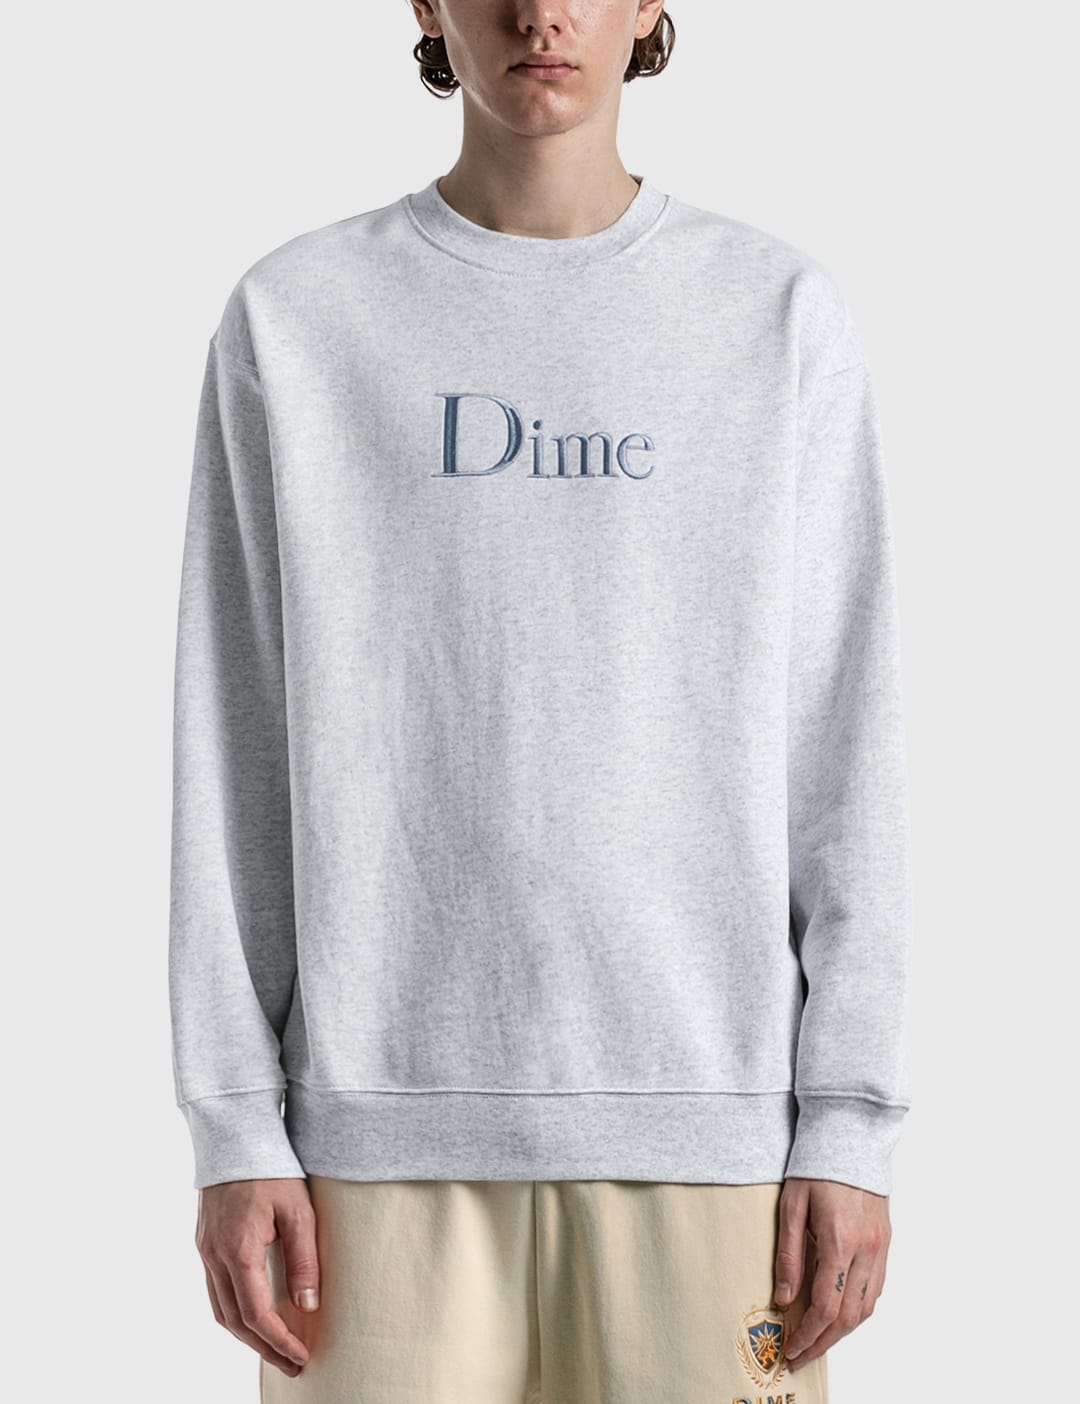 Dime - Classic Logo Crewneck | HBX - Globally Curated Fashion and 